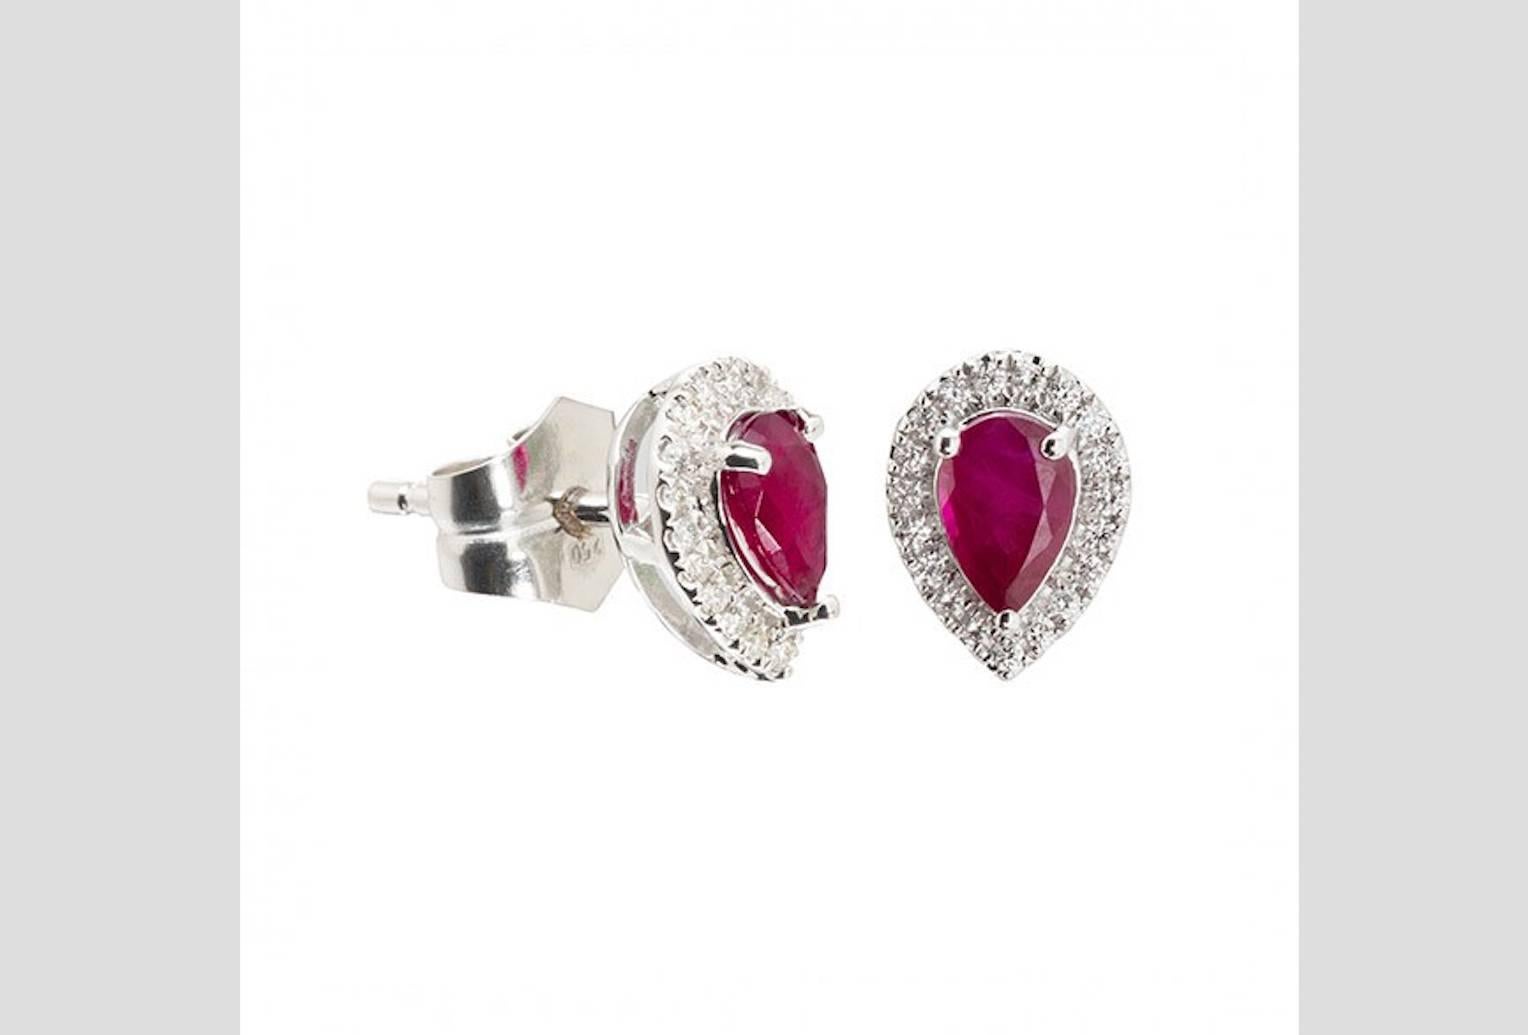 Amazing Stud Earrings set in 18 K White Gold  surrounded by wonderful brilliants and in the middle the ruby. The earrings radiate luxury and grace.

white Brilliants (a total of  0.14 ct.)
2 Rubies (a total of 1 Karat)
18 K White Gold 

Original